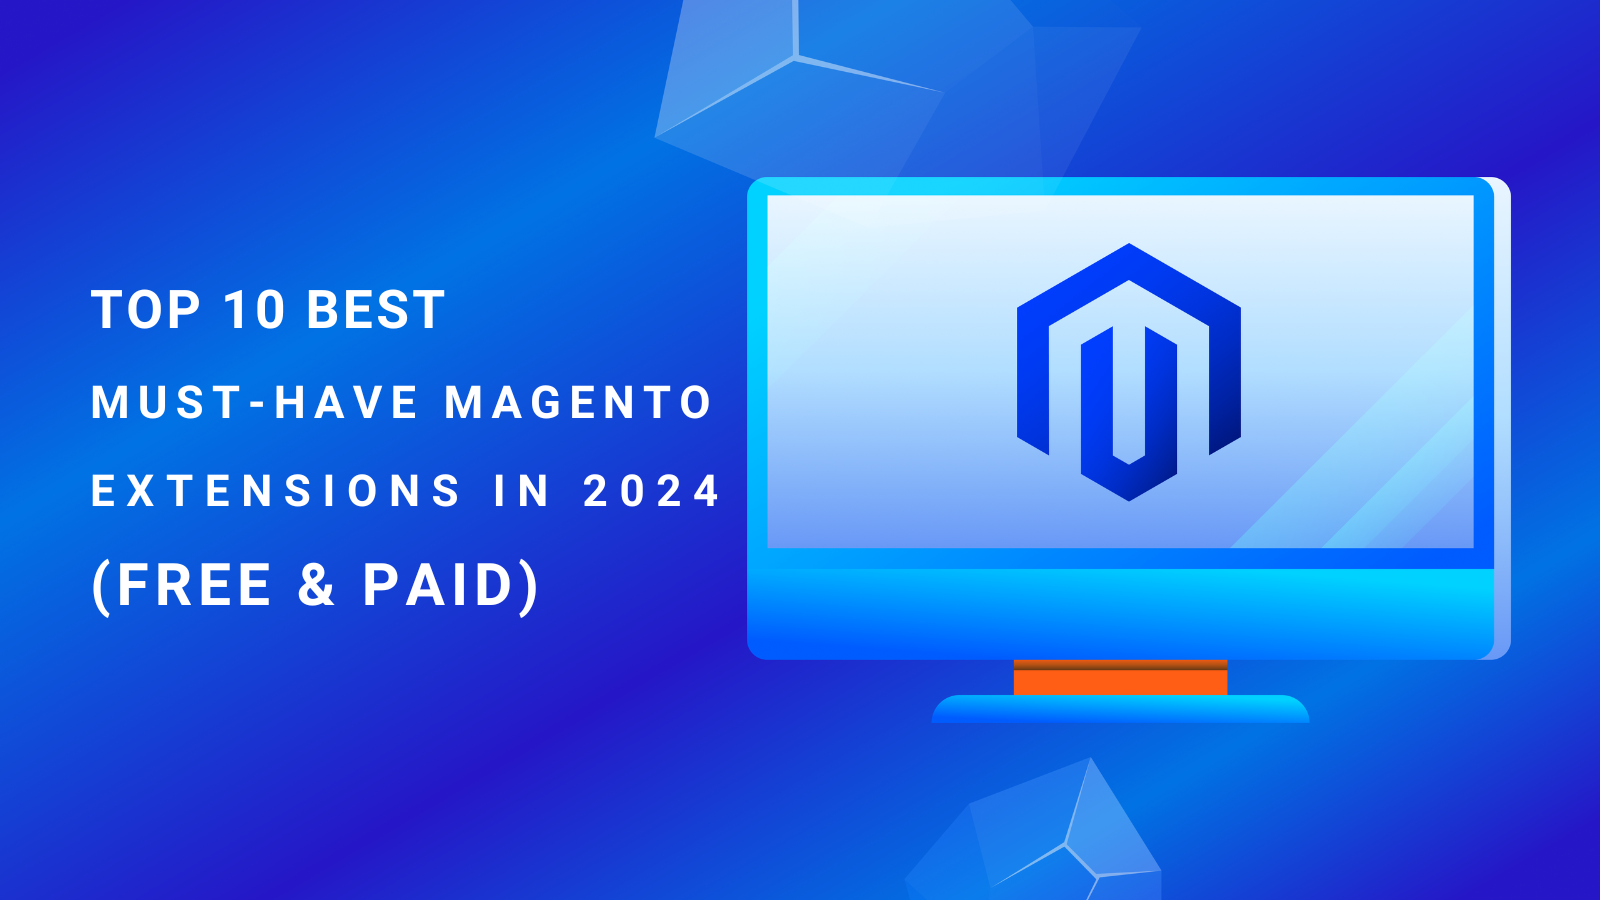 Top 10 Best Must-Have Magento Extensions in 2024 (Free & Paid)